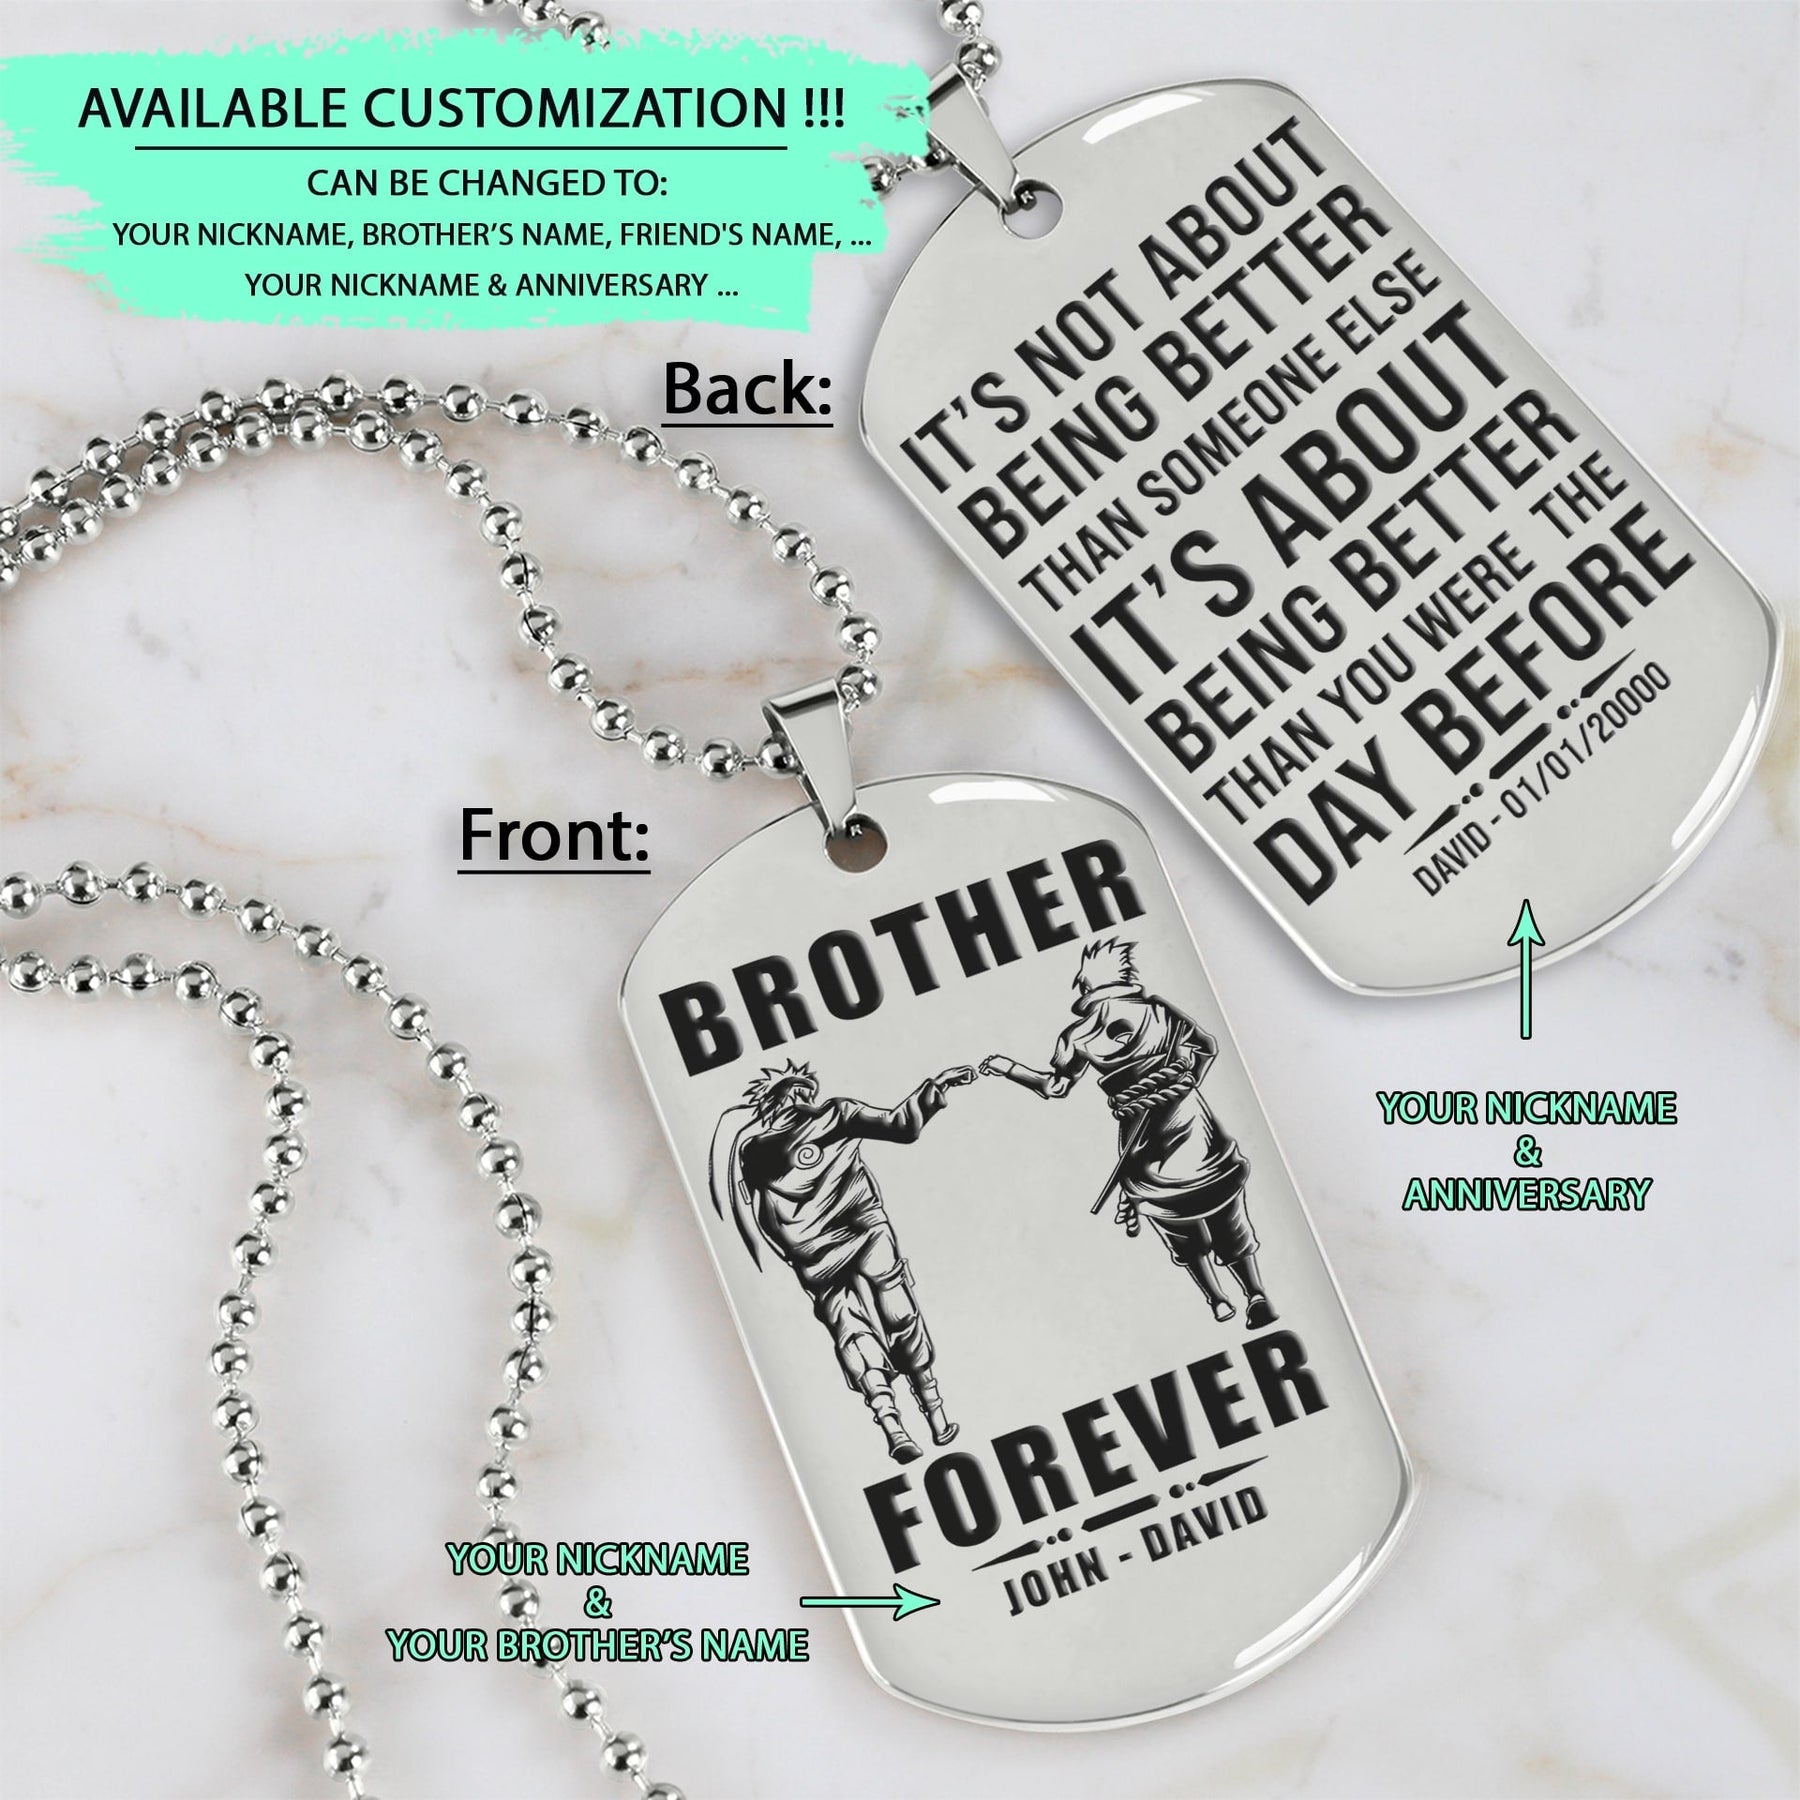 NAD028 - Brother Forever - It's Not About Being Better Than Someone Else - It's About Being Better Than You Were The Day Before - Uzumaki Naruto - Uchiha Sasuke - Naruto Dog Tag - Engrave Double Side Silver Dog Tag